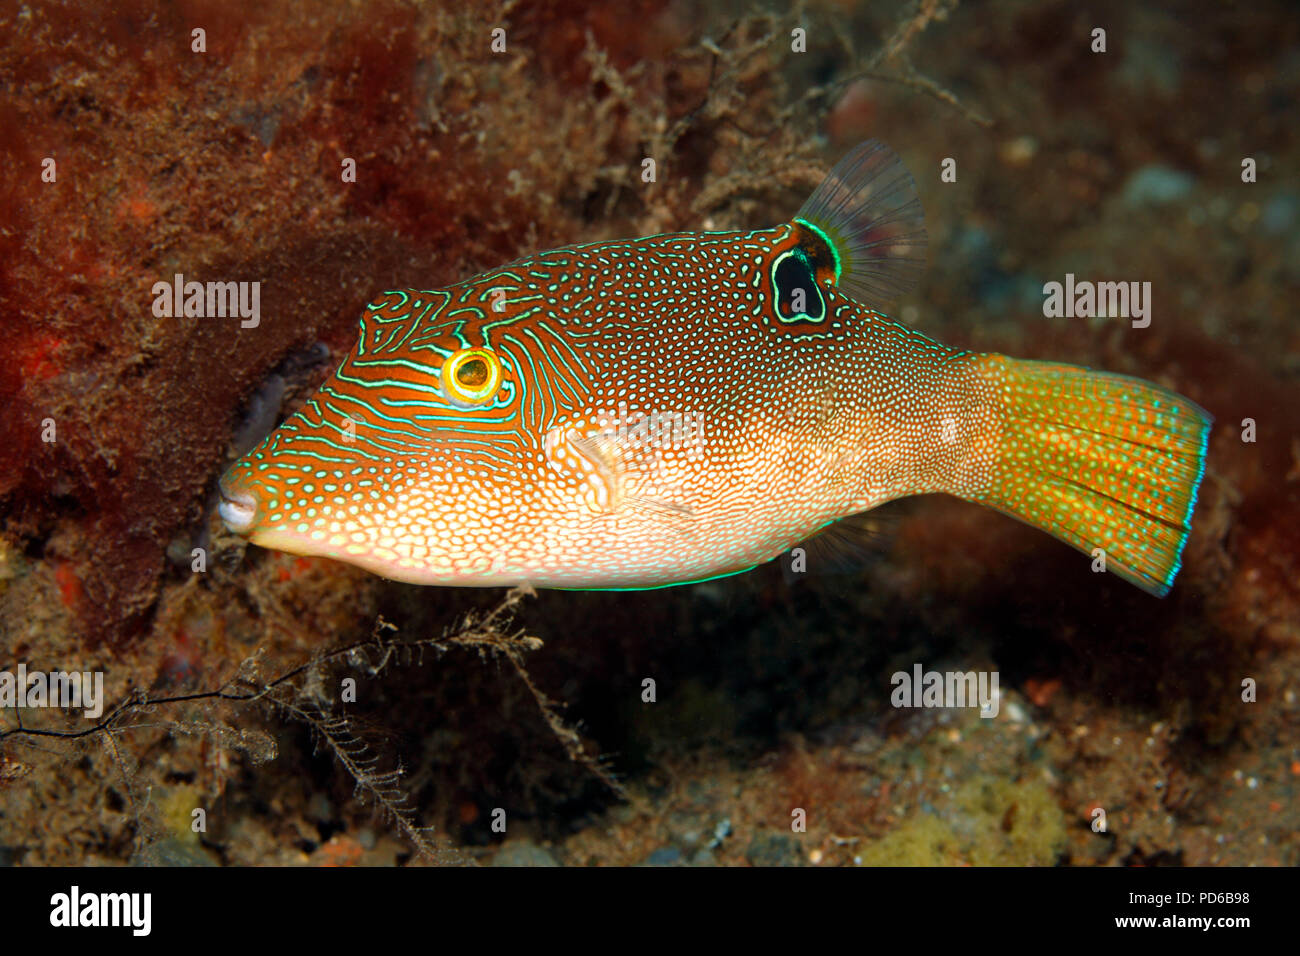 Fingerprint Toby, also known as Compressed Toby, Fingerprint Sharpnose Puffer, Fine-spotted Pufferfish, Canthigaster compressa, adult. Tulamben, Bali Stock Photo